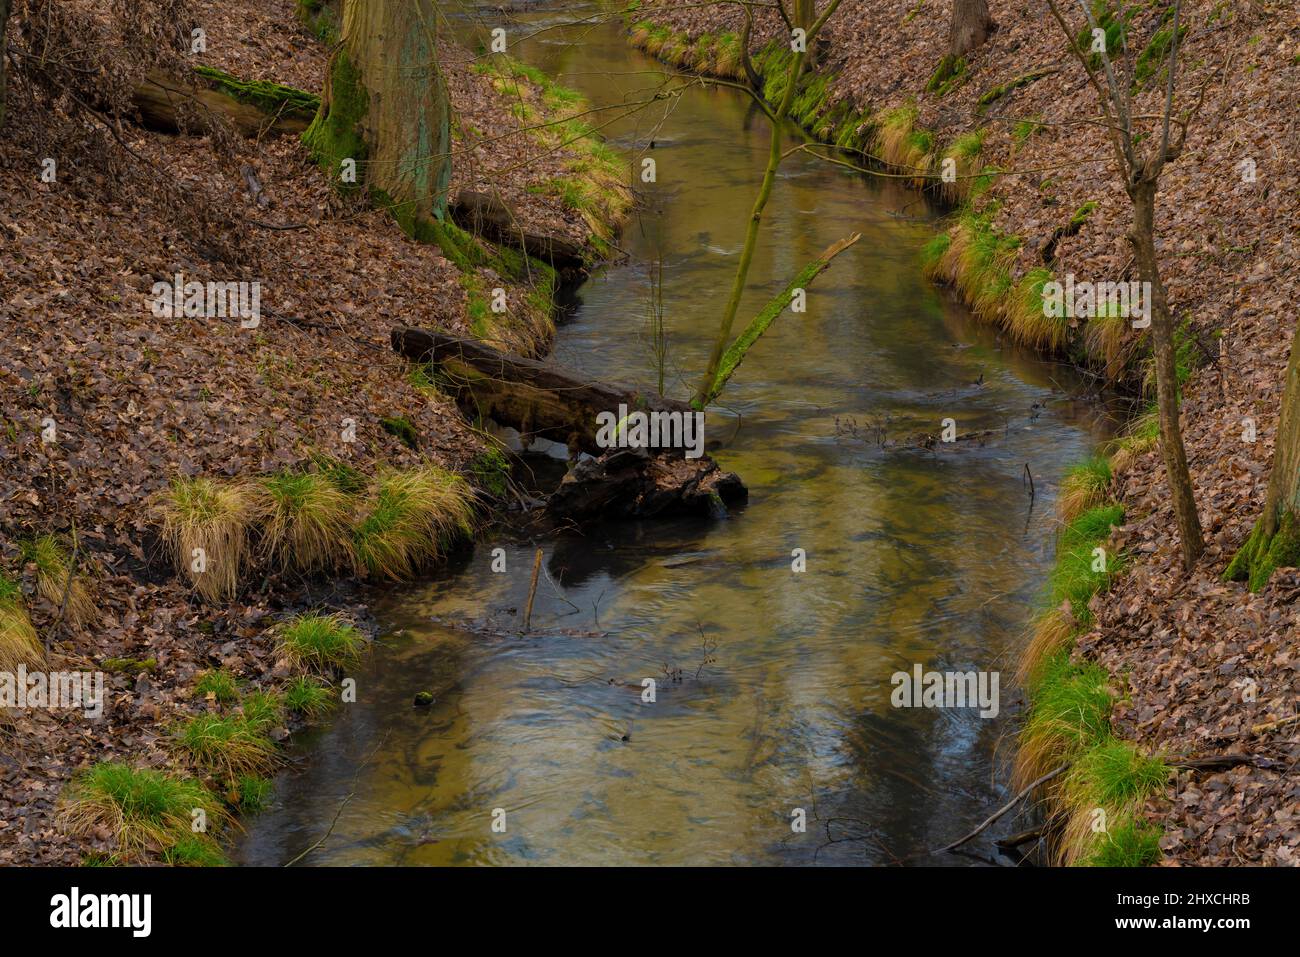 Small river in the forest, Remains of a tree trunk lie in the water Stock Photo